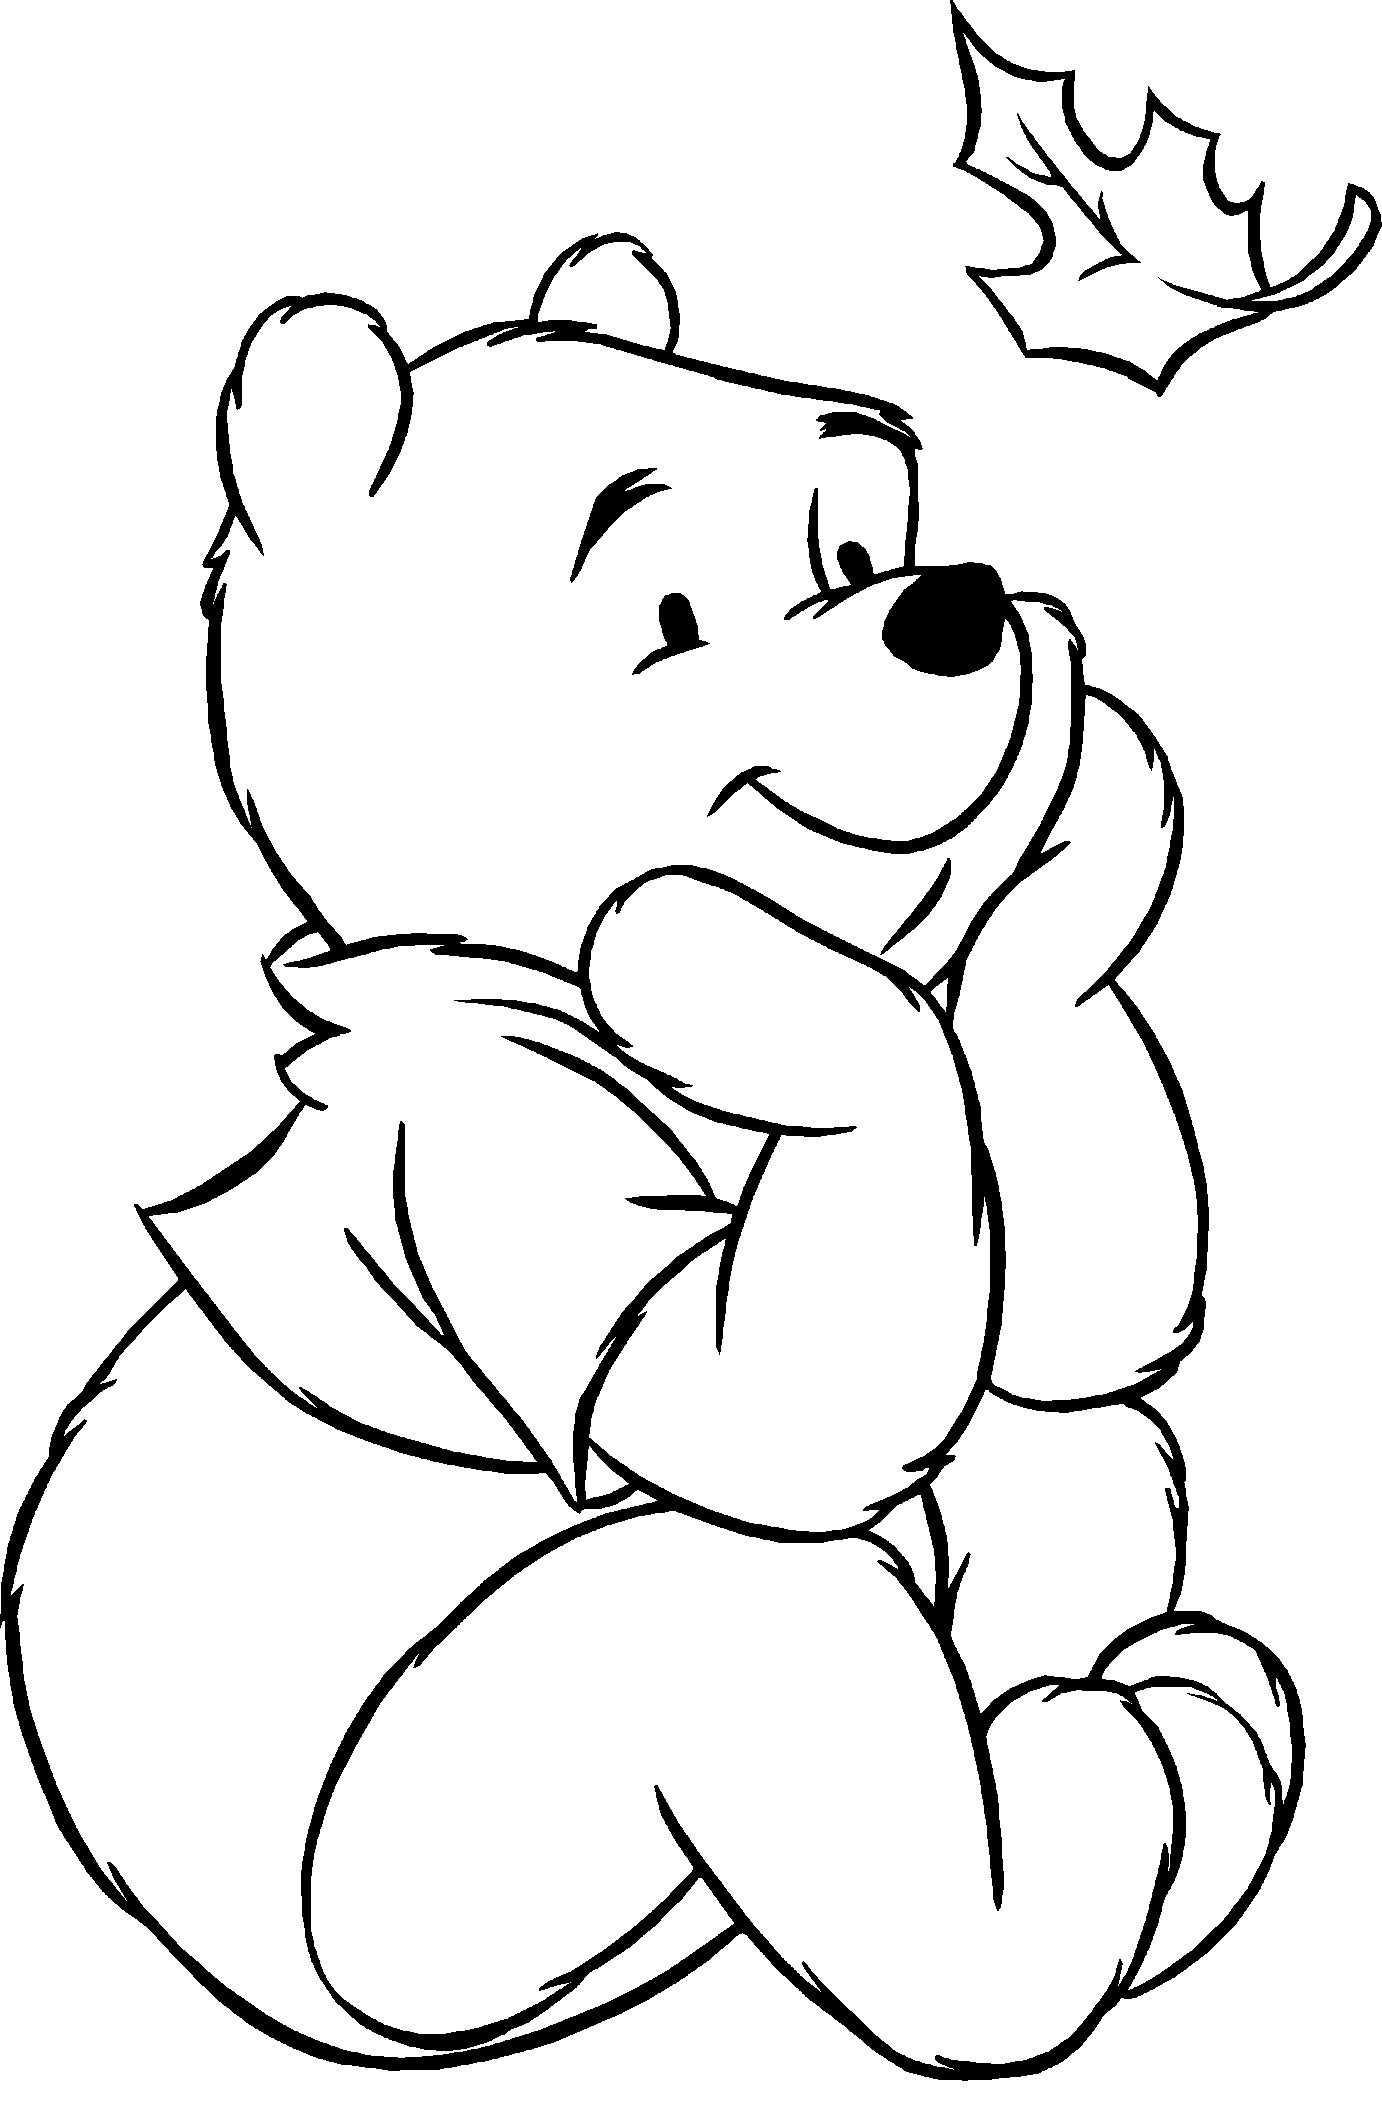 Free Winnie The Pooh Coloring Pages Google Search Met